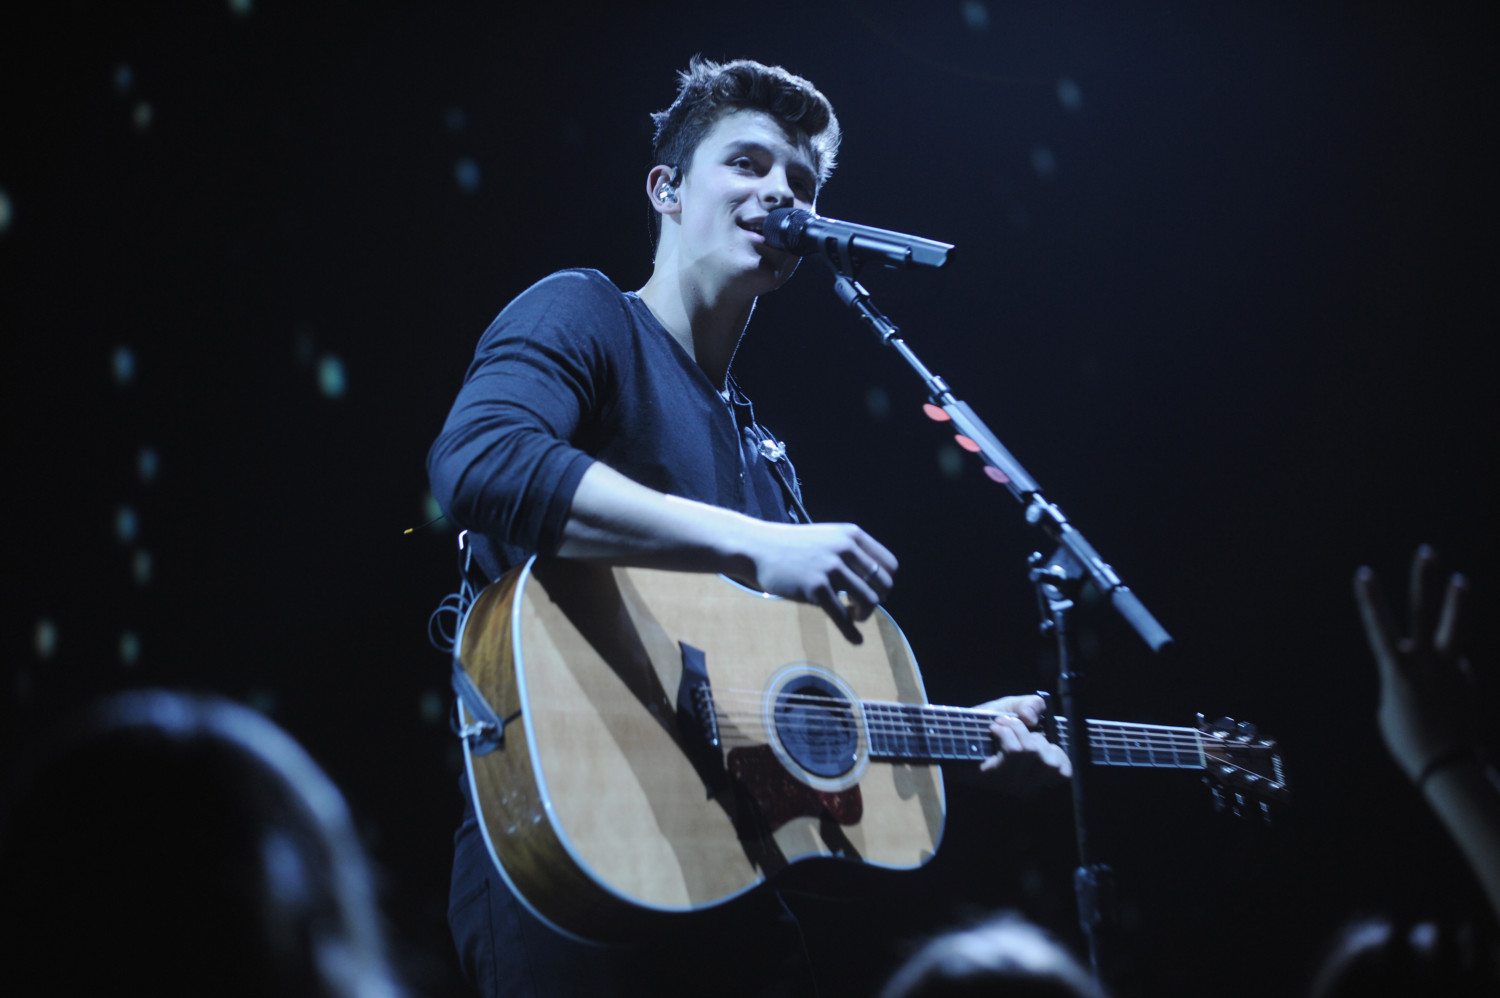 Shawn Mendes Performs At Sold Out Radio City Music Hall